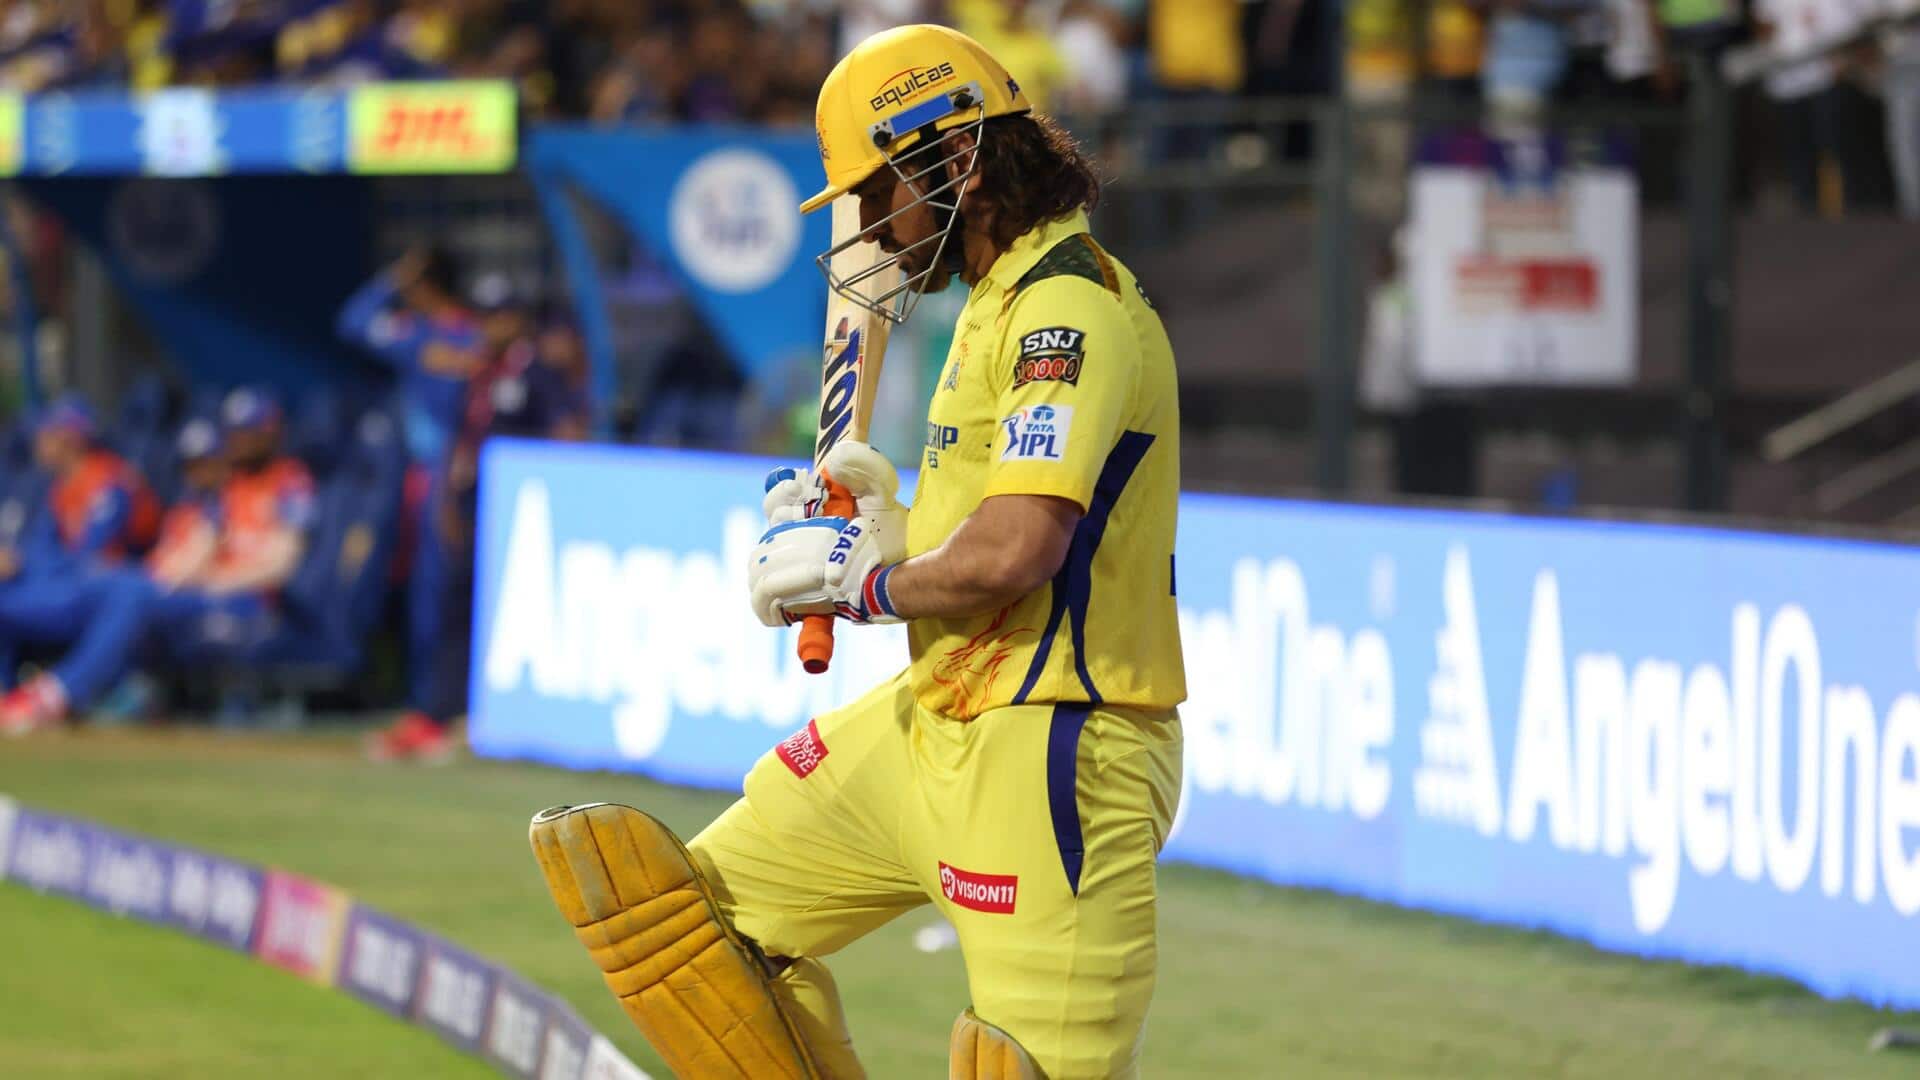 MS Dhoni completes 250 sixes in IPL: Decoding his stats